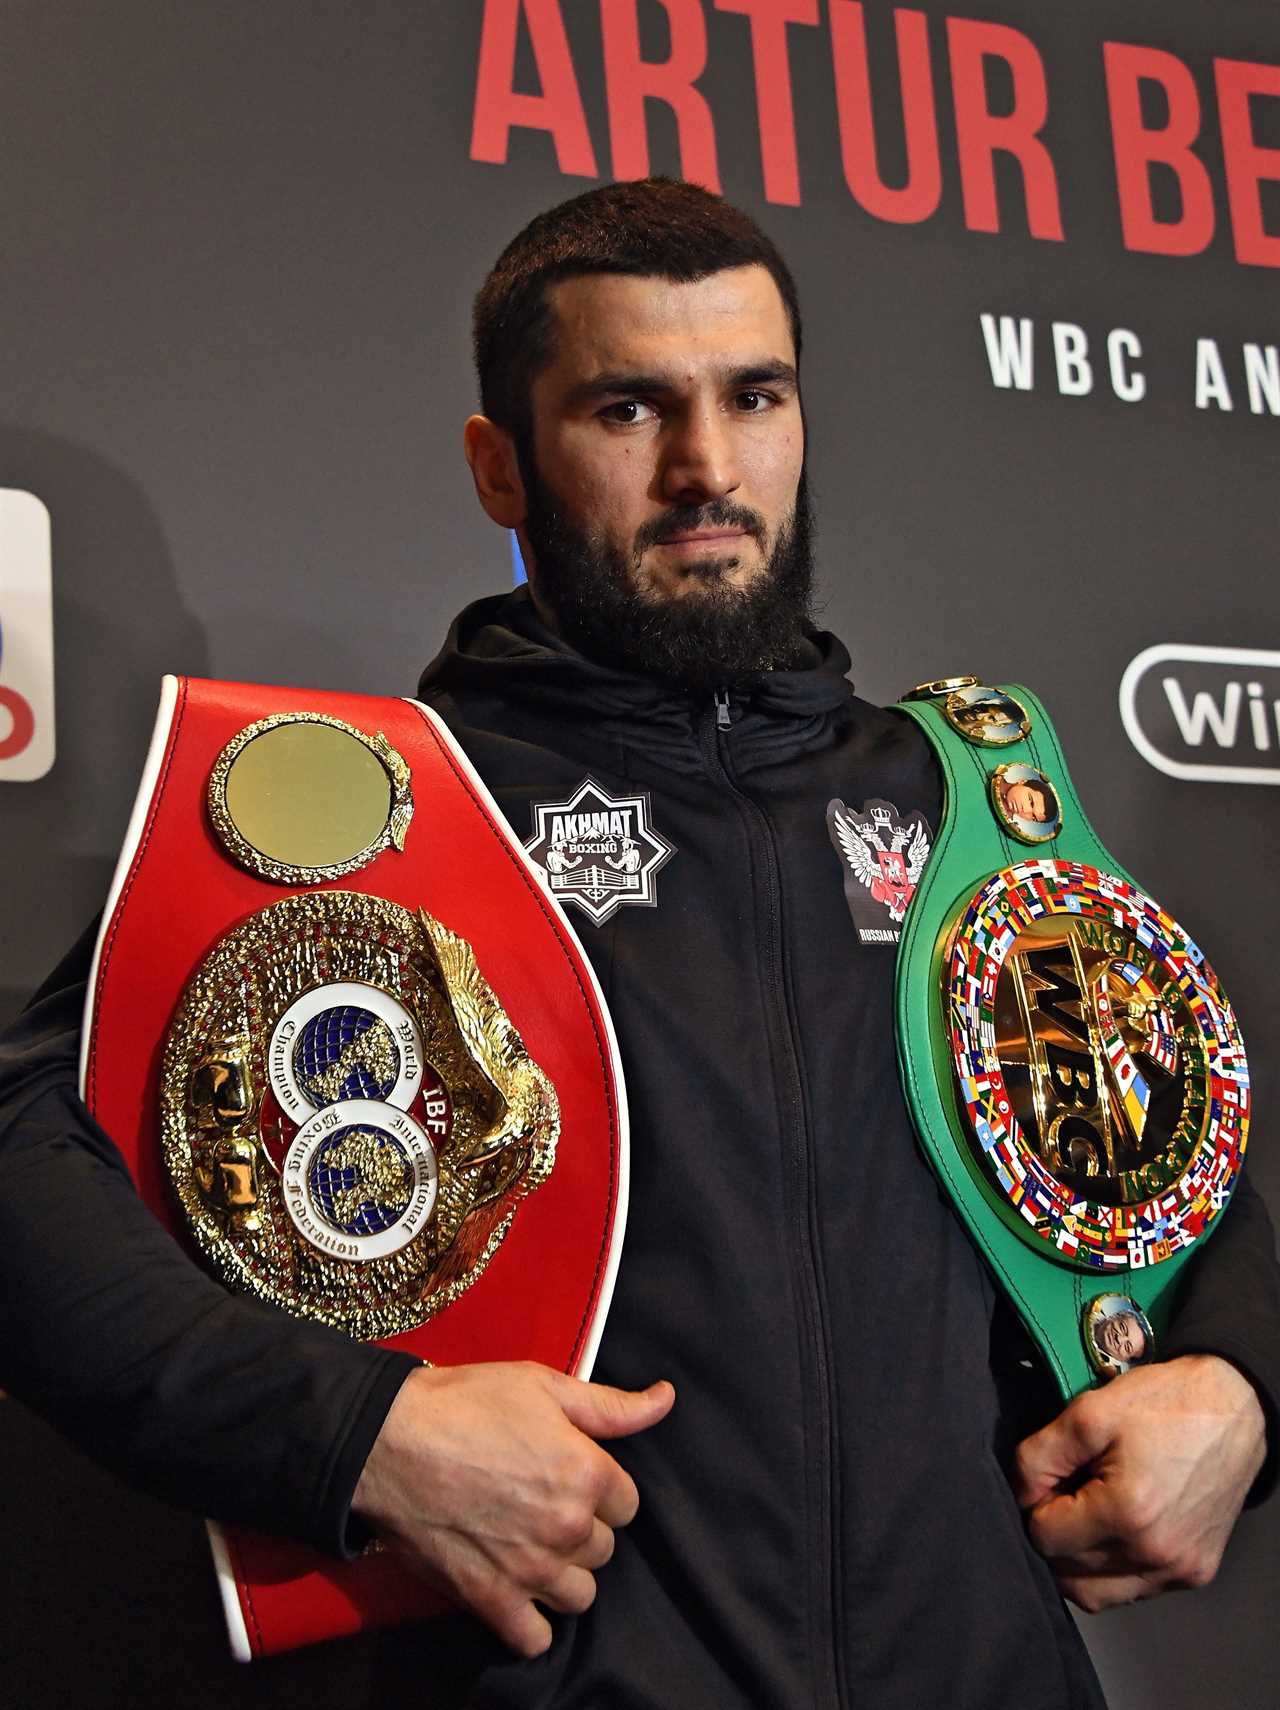 Artur Beterbiev claimed Canelo Alvarez is weak because of his punching power. He claims he has a blueprint to defeat P4P star